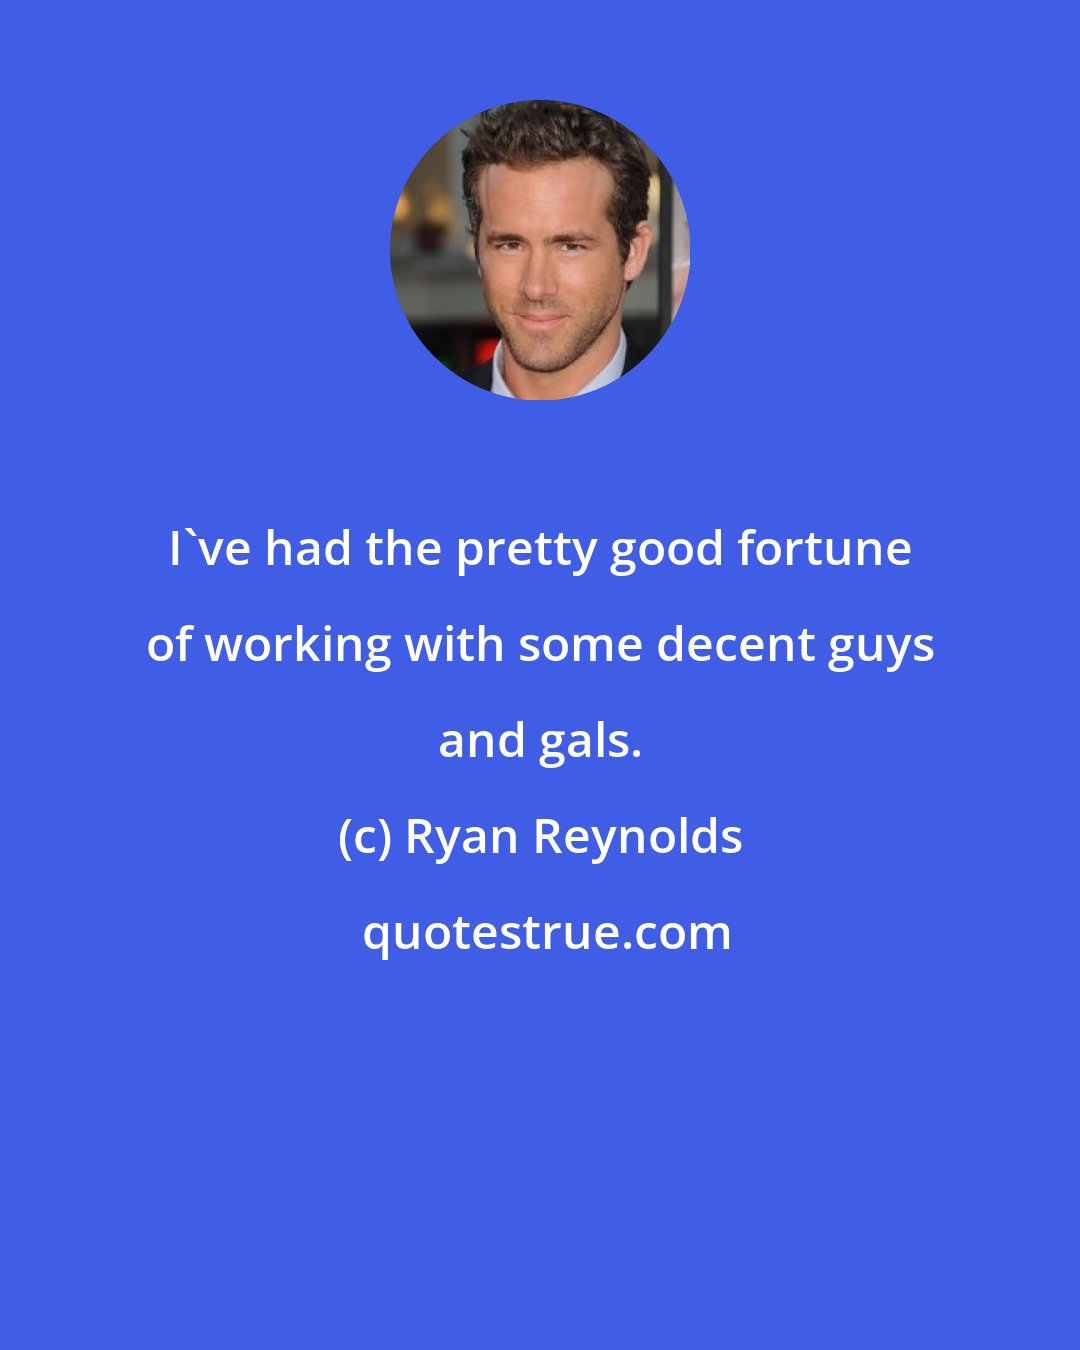 Ryan Reynolds: I've had the pretty good fortune of working with some decent guys and gals.